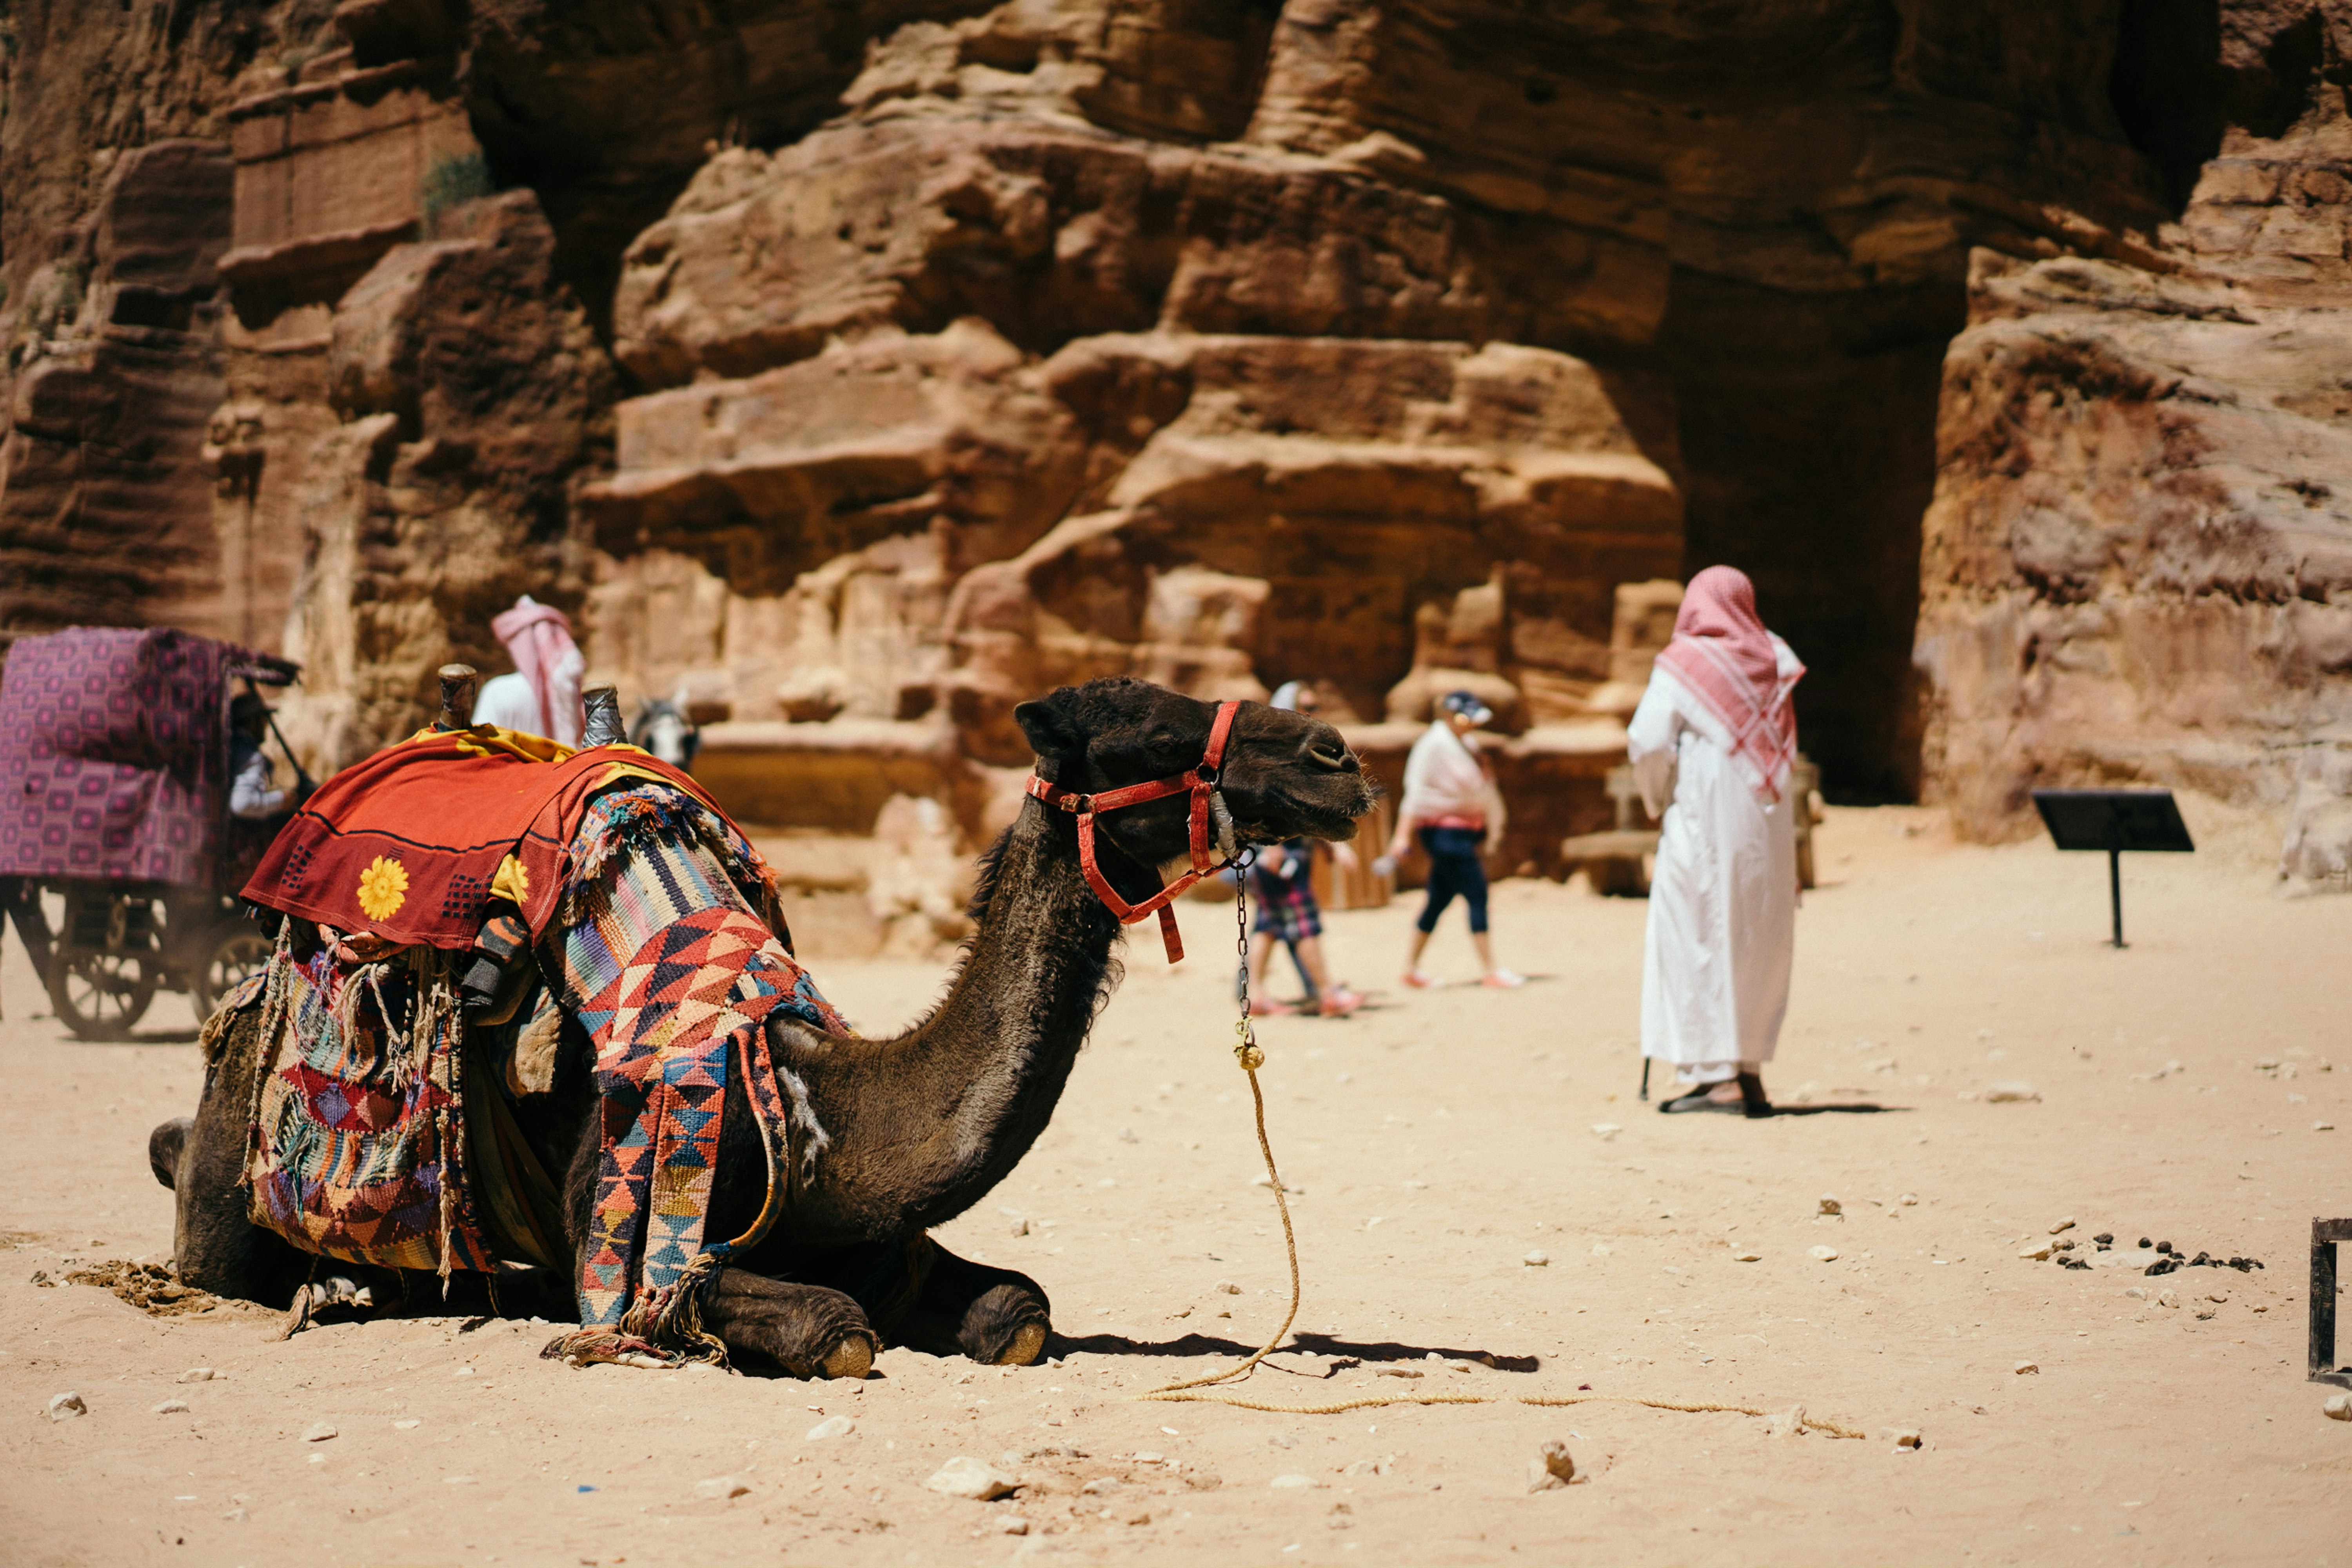 camel sitting on ground near people and rocks